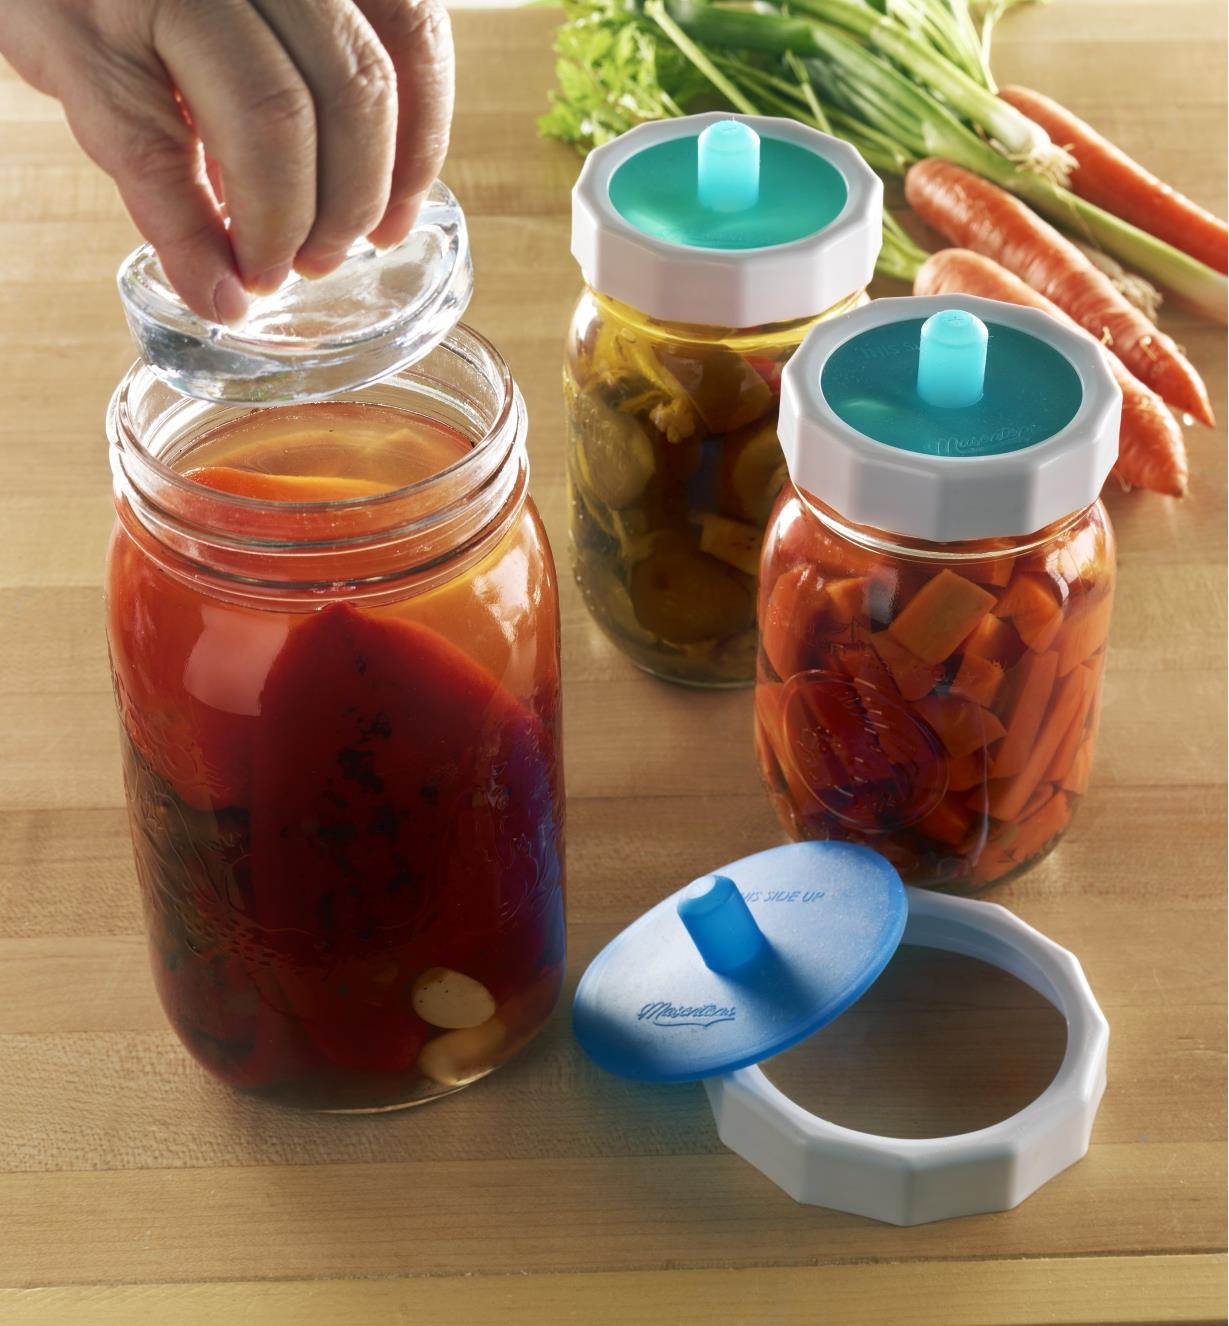 Tough bands on jars used with fermentation sets to ferment foods